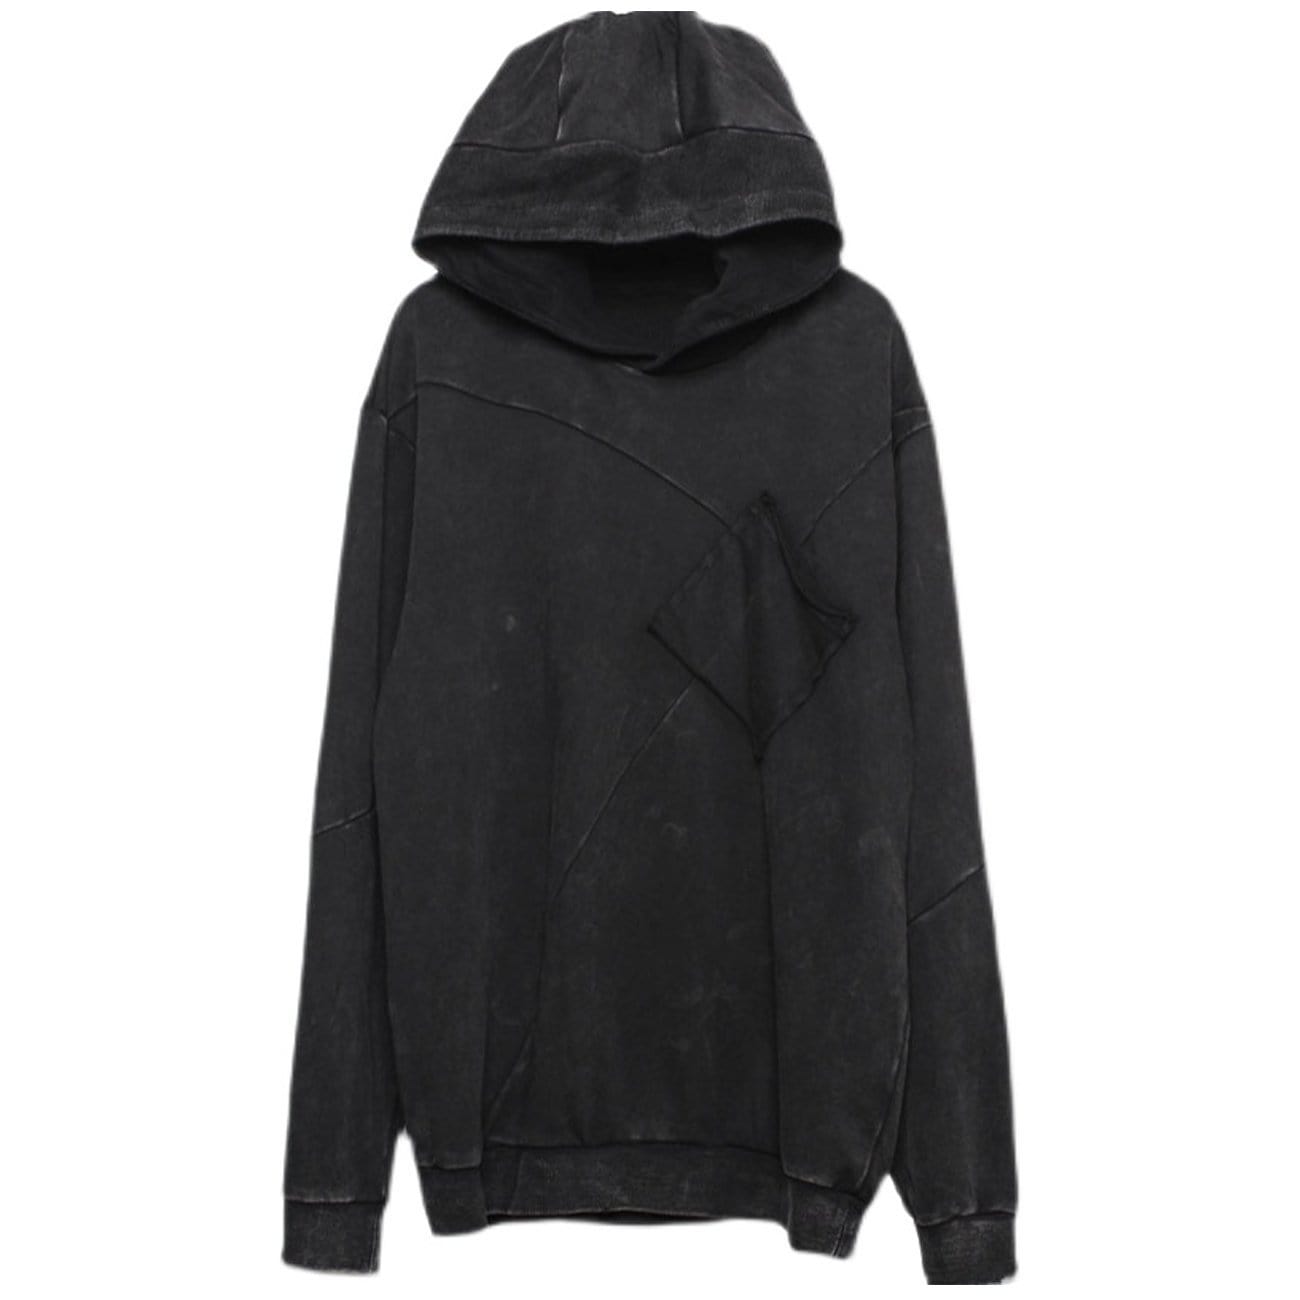 Function Vintage Patchwork Washed Hoodie Streetwear Brand Techwear Combat Tactical YUGEN THEORY